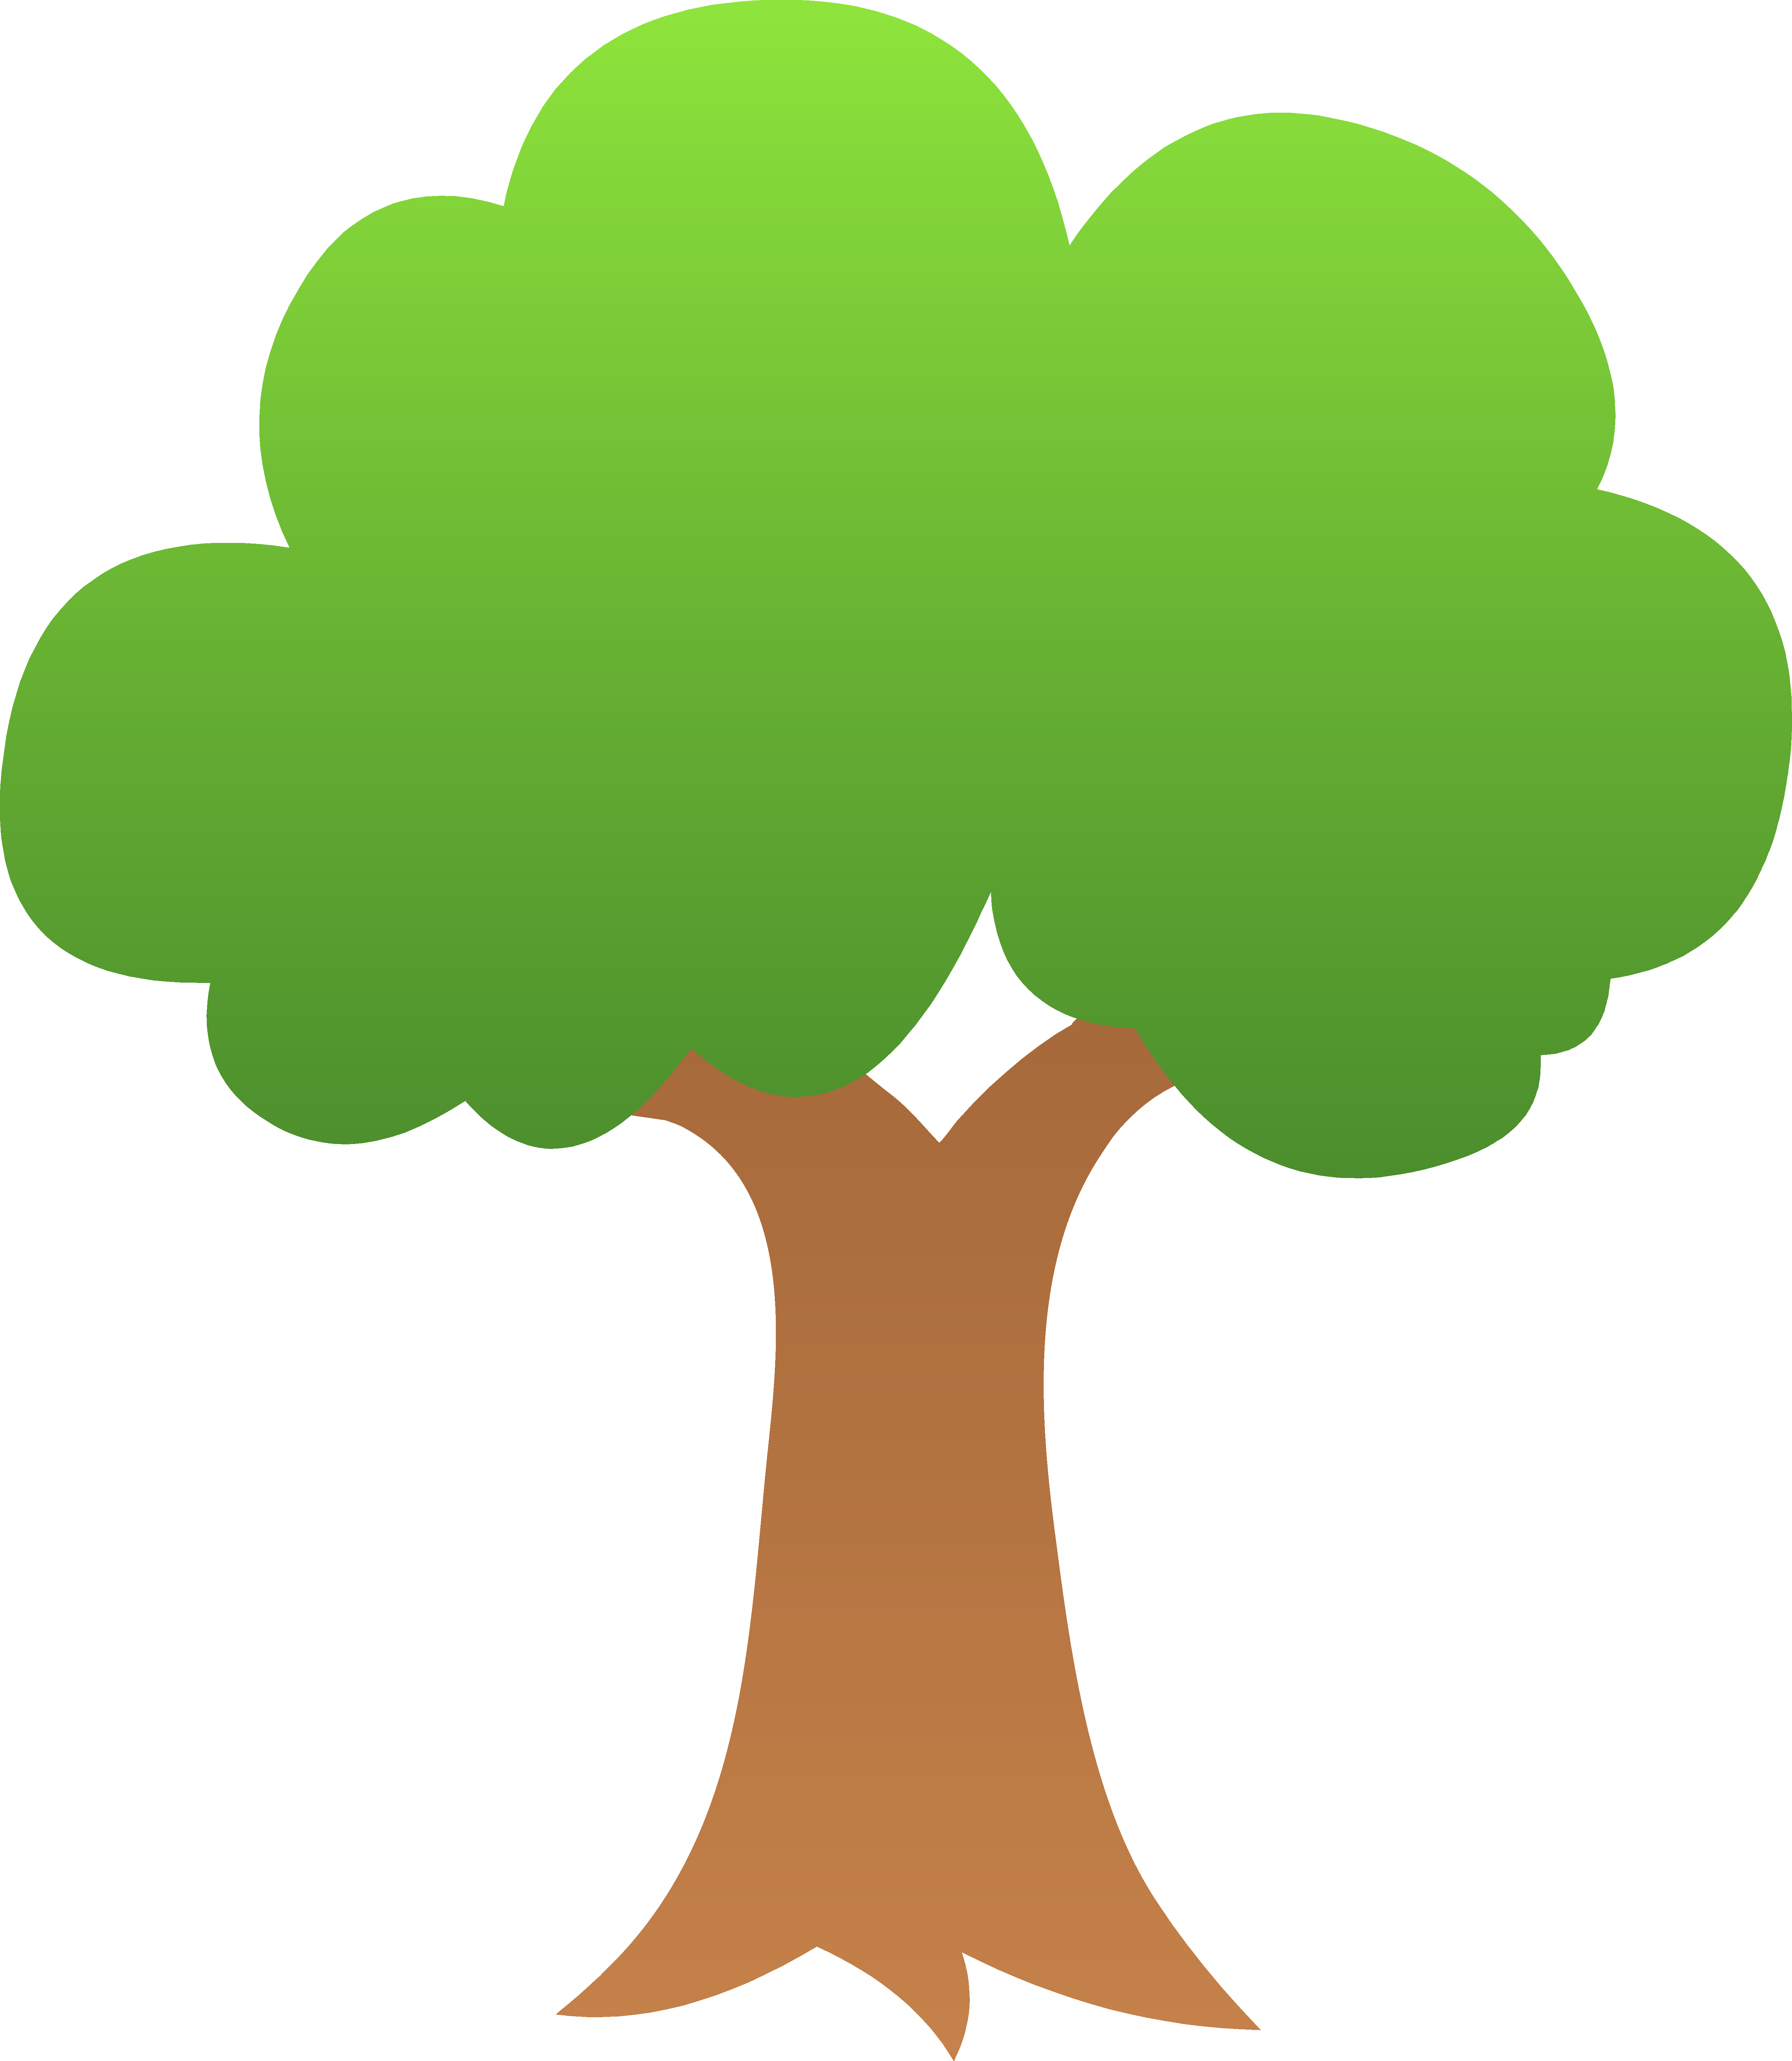 Tree clip art background free clipart images